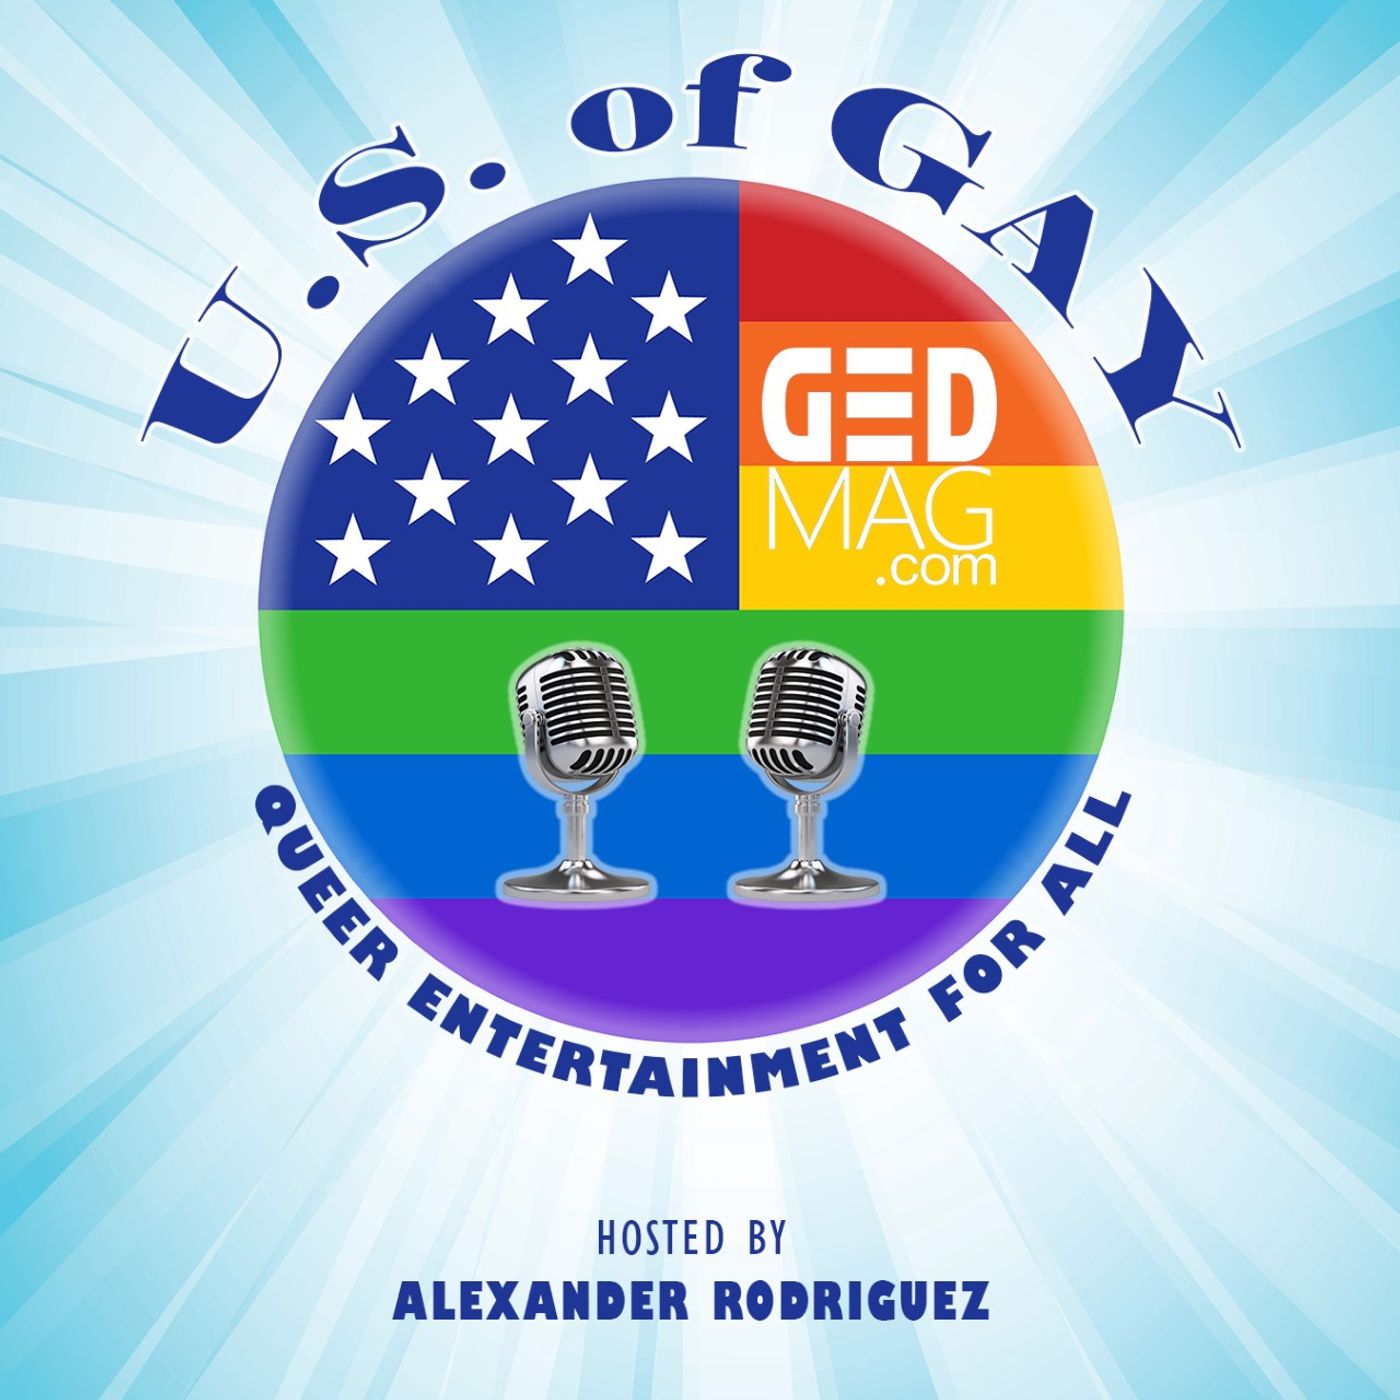 U.S. of Gay – Queer Entertainment for All